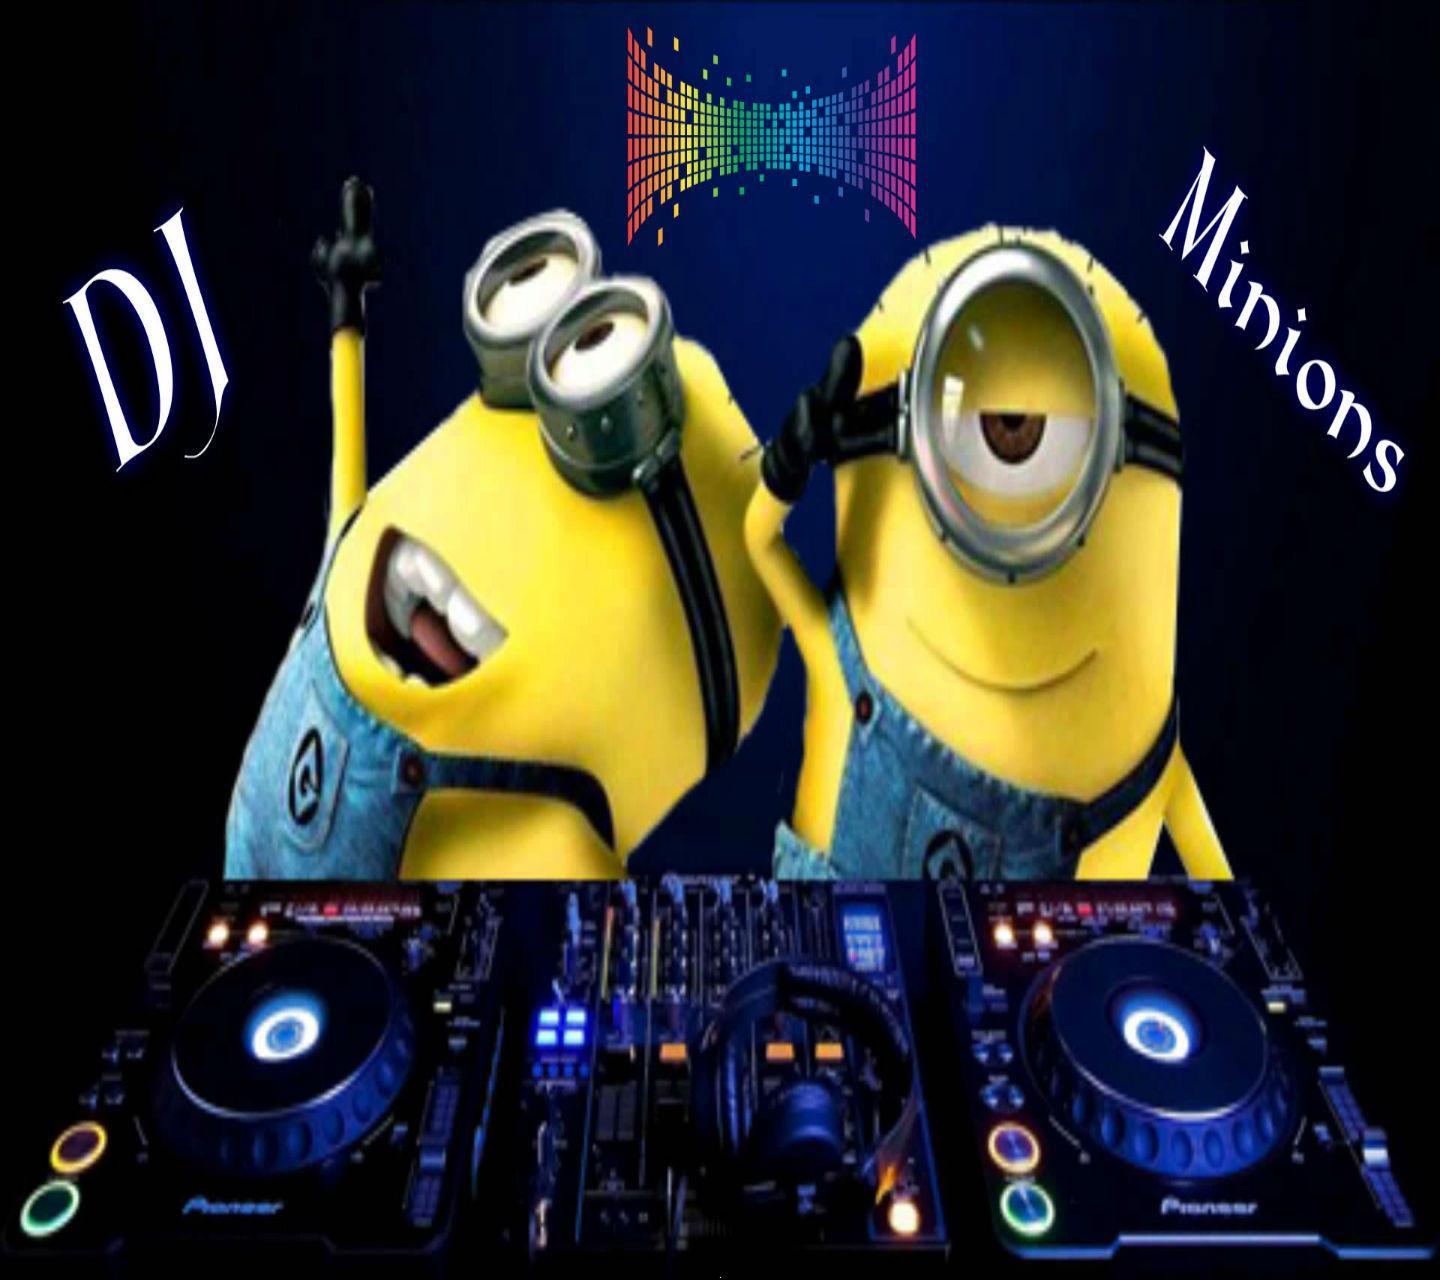 Download Dj minions - Funny wallpapers for your mobile cell phone